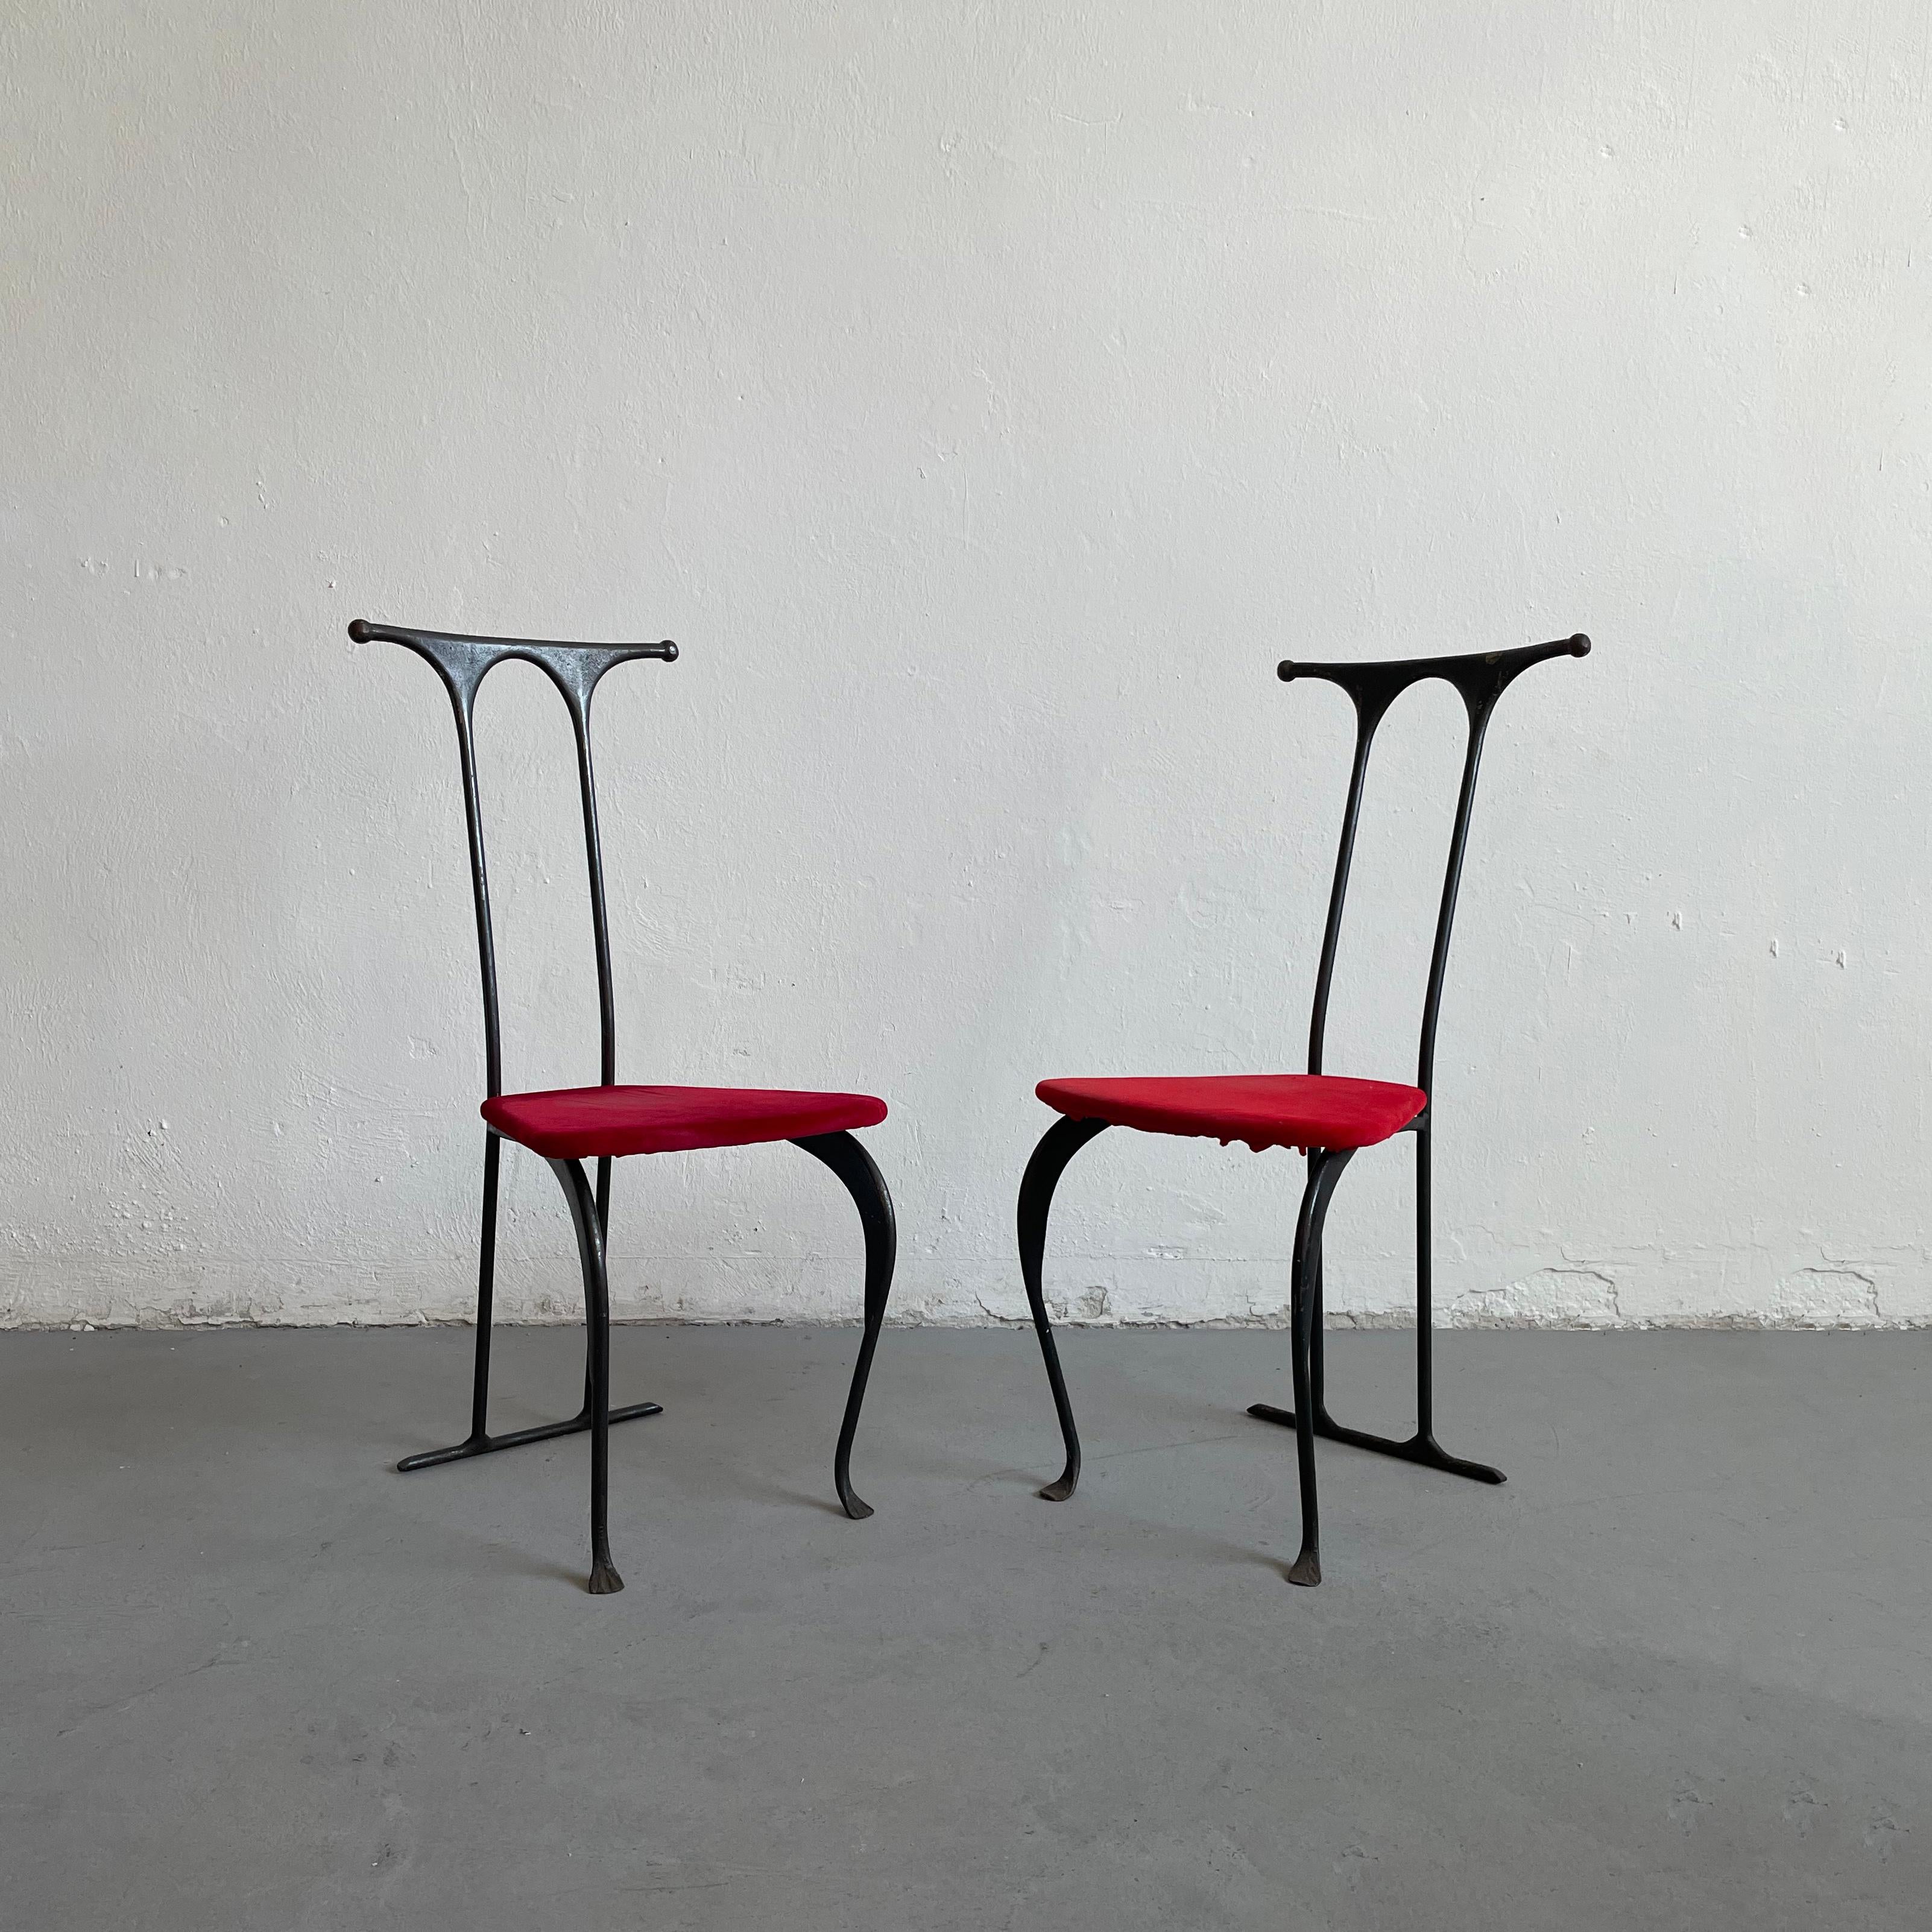 Pair of wrought iron brutalist chairs handcrafted in the 1980s by a Polish artist.

The chairs are in good original condition with age and use related wear marks. The fabric of the seats is worn and has some stains. The chairs are sold as